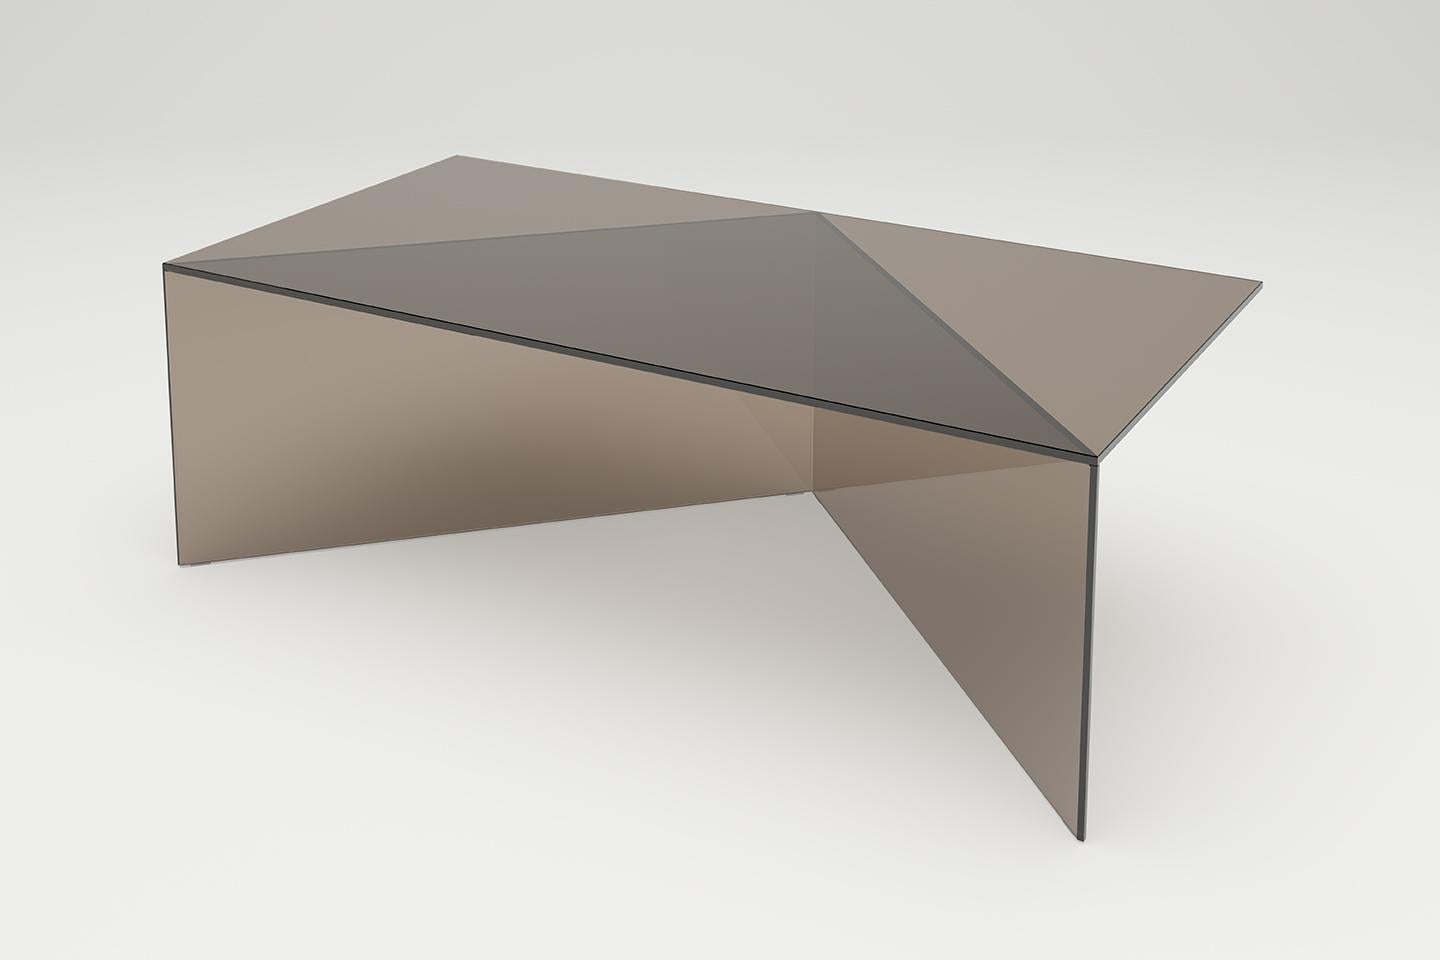 Bronze clear glass poly oblong coffee table by Sebastian Scherer
Dimensions: D120 x W30 x H40 cm
Materials: Solid coloured glass.
Weight: 34.4 kg.
Also Available: Colours:Clear white (transparent) / clear green / clear blue / clear bronze / clear